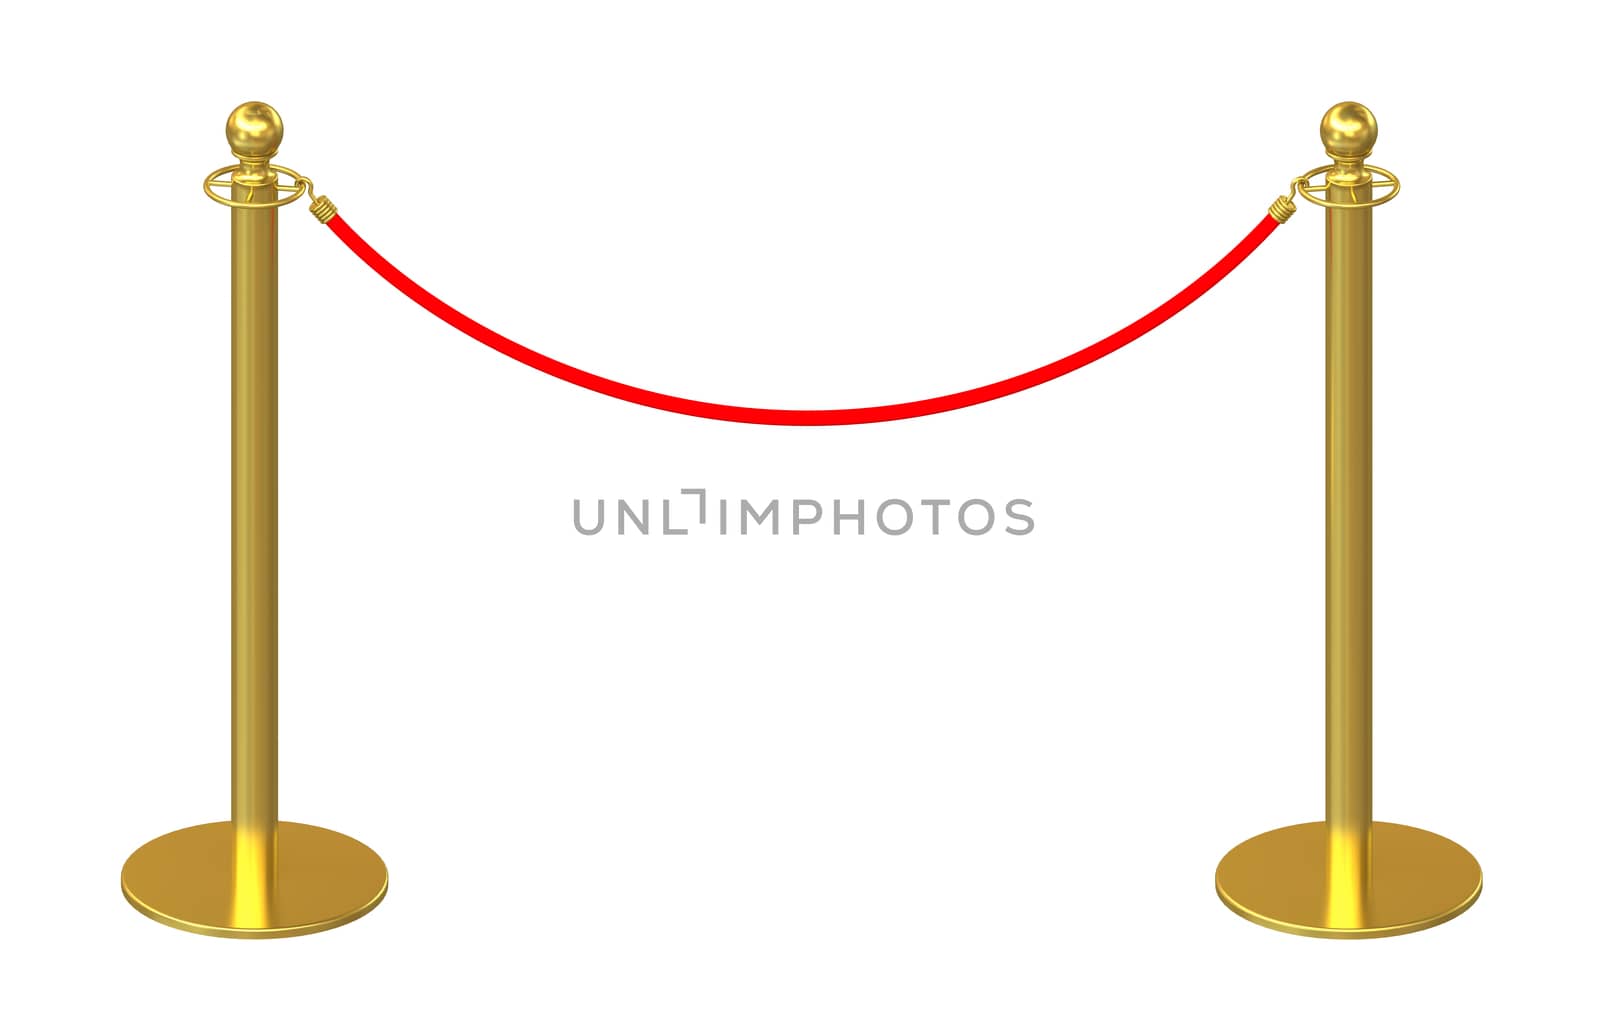 Golden fence, stanchion with red barrier rope, isolated on white background. 3d rendering